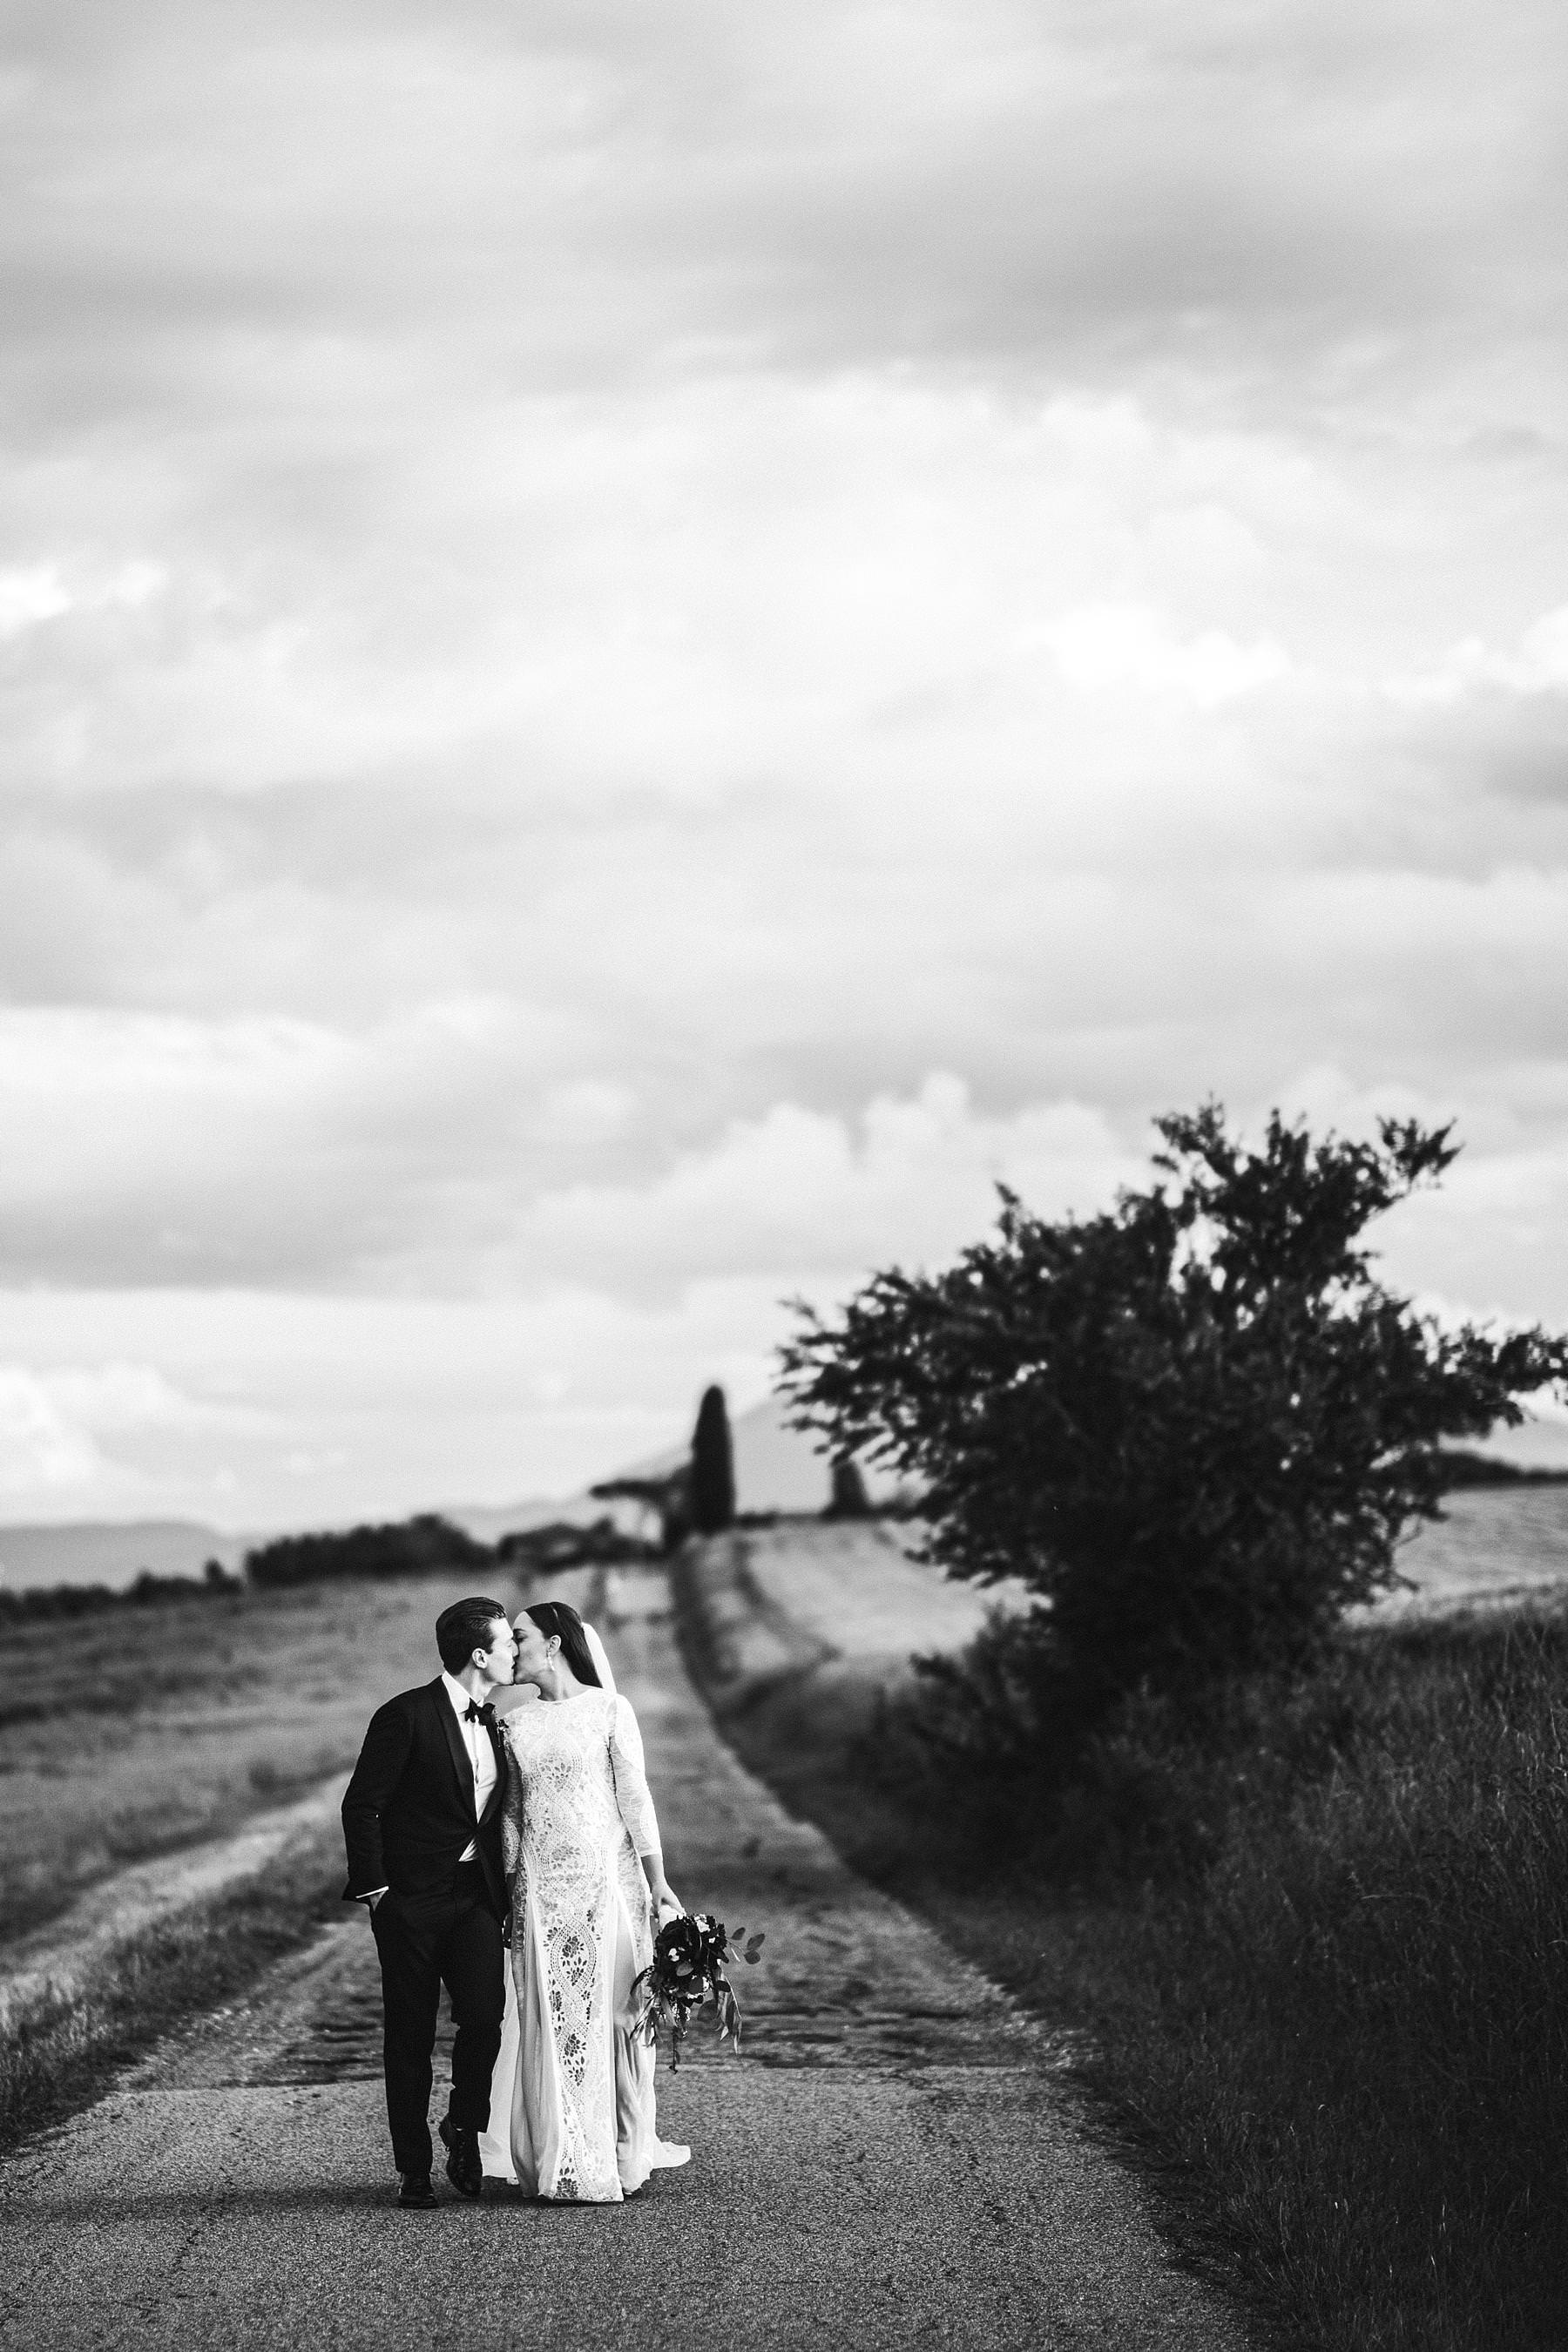 Romantic and timeless bride and groom wedding photo in Umbria near Villa l’Antica Posta venue. Bride dress by Grace Loves Lace